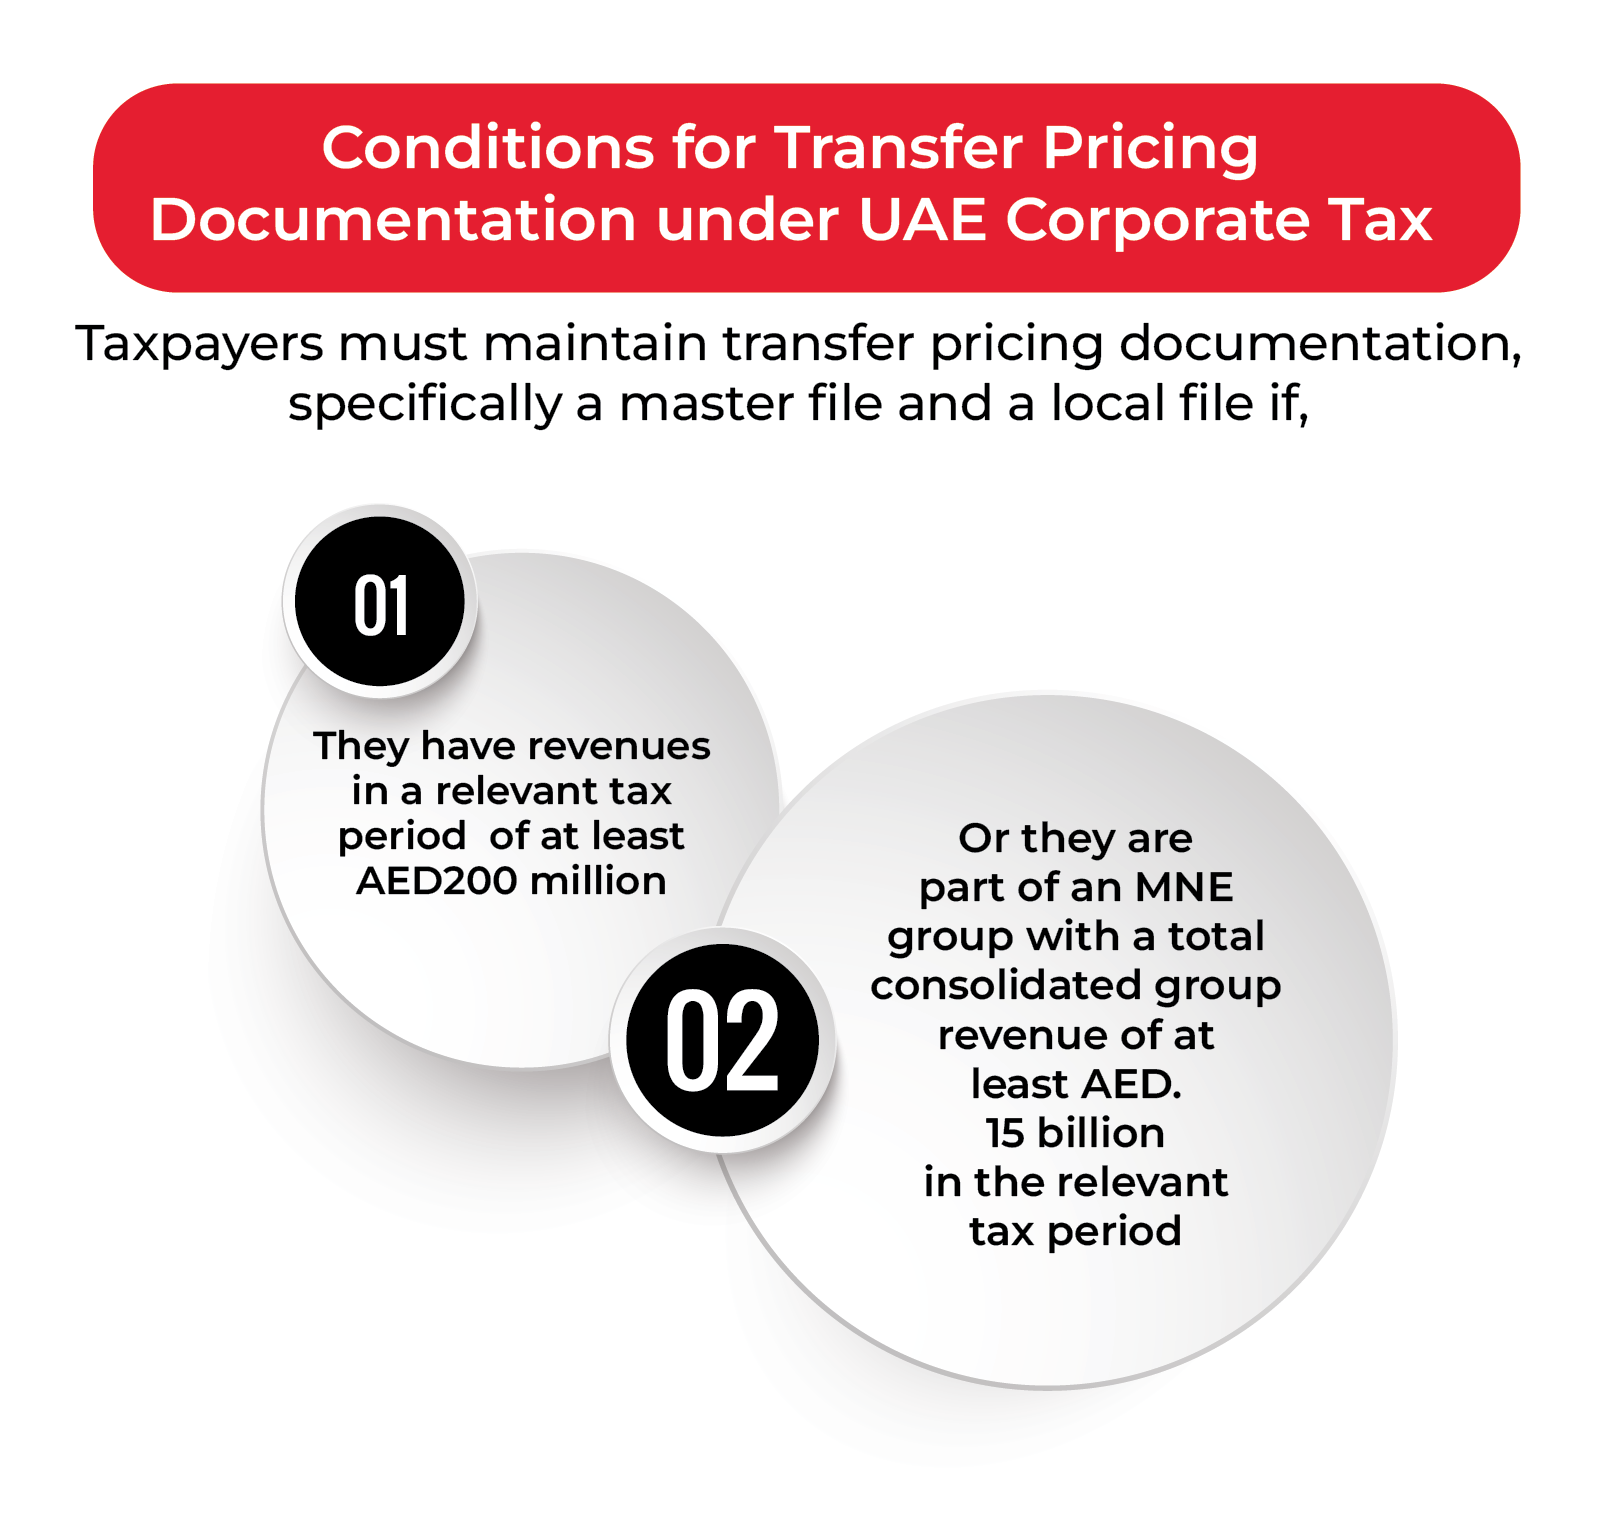 Image explaining the conditions for transfer pricing documentation under UAE Corporate Tax law